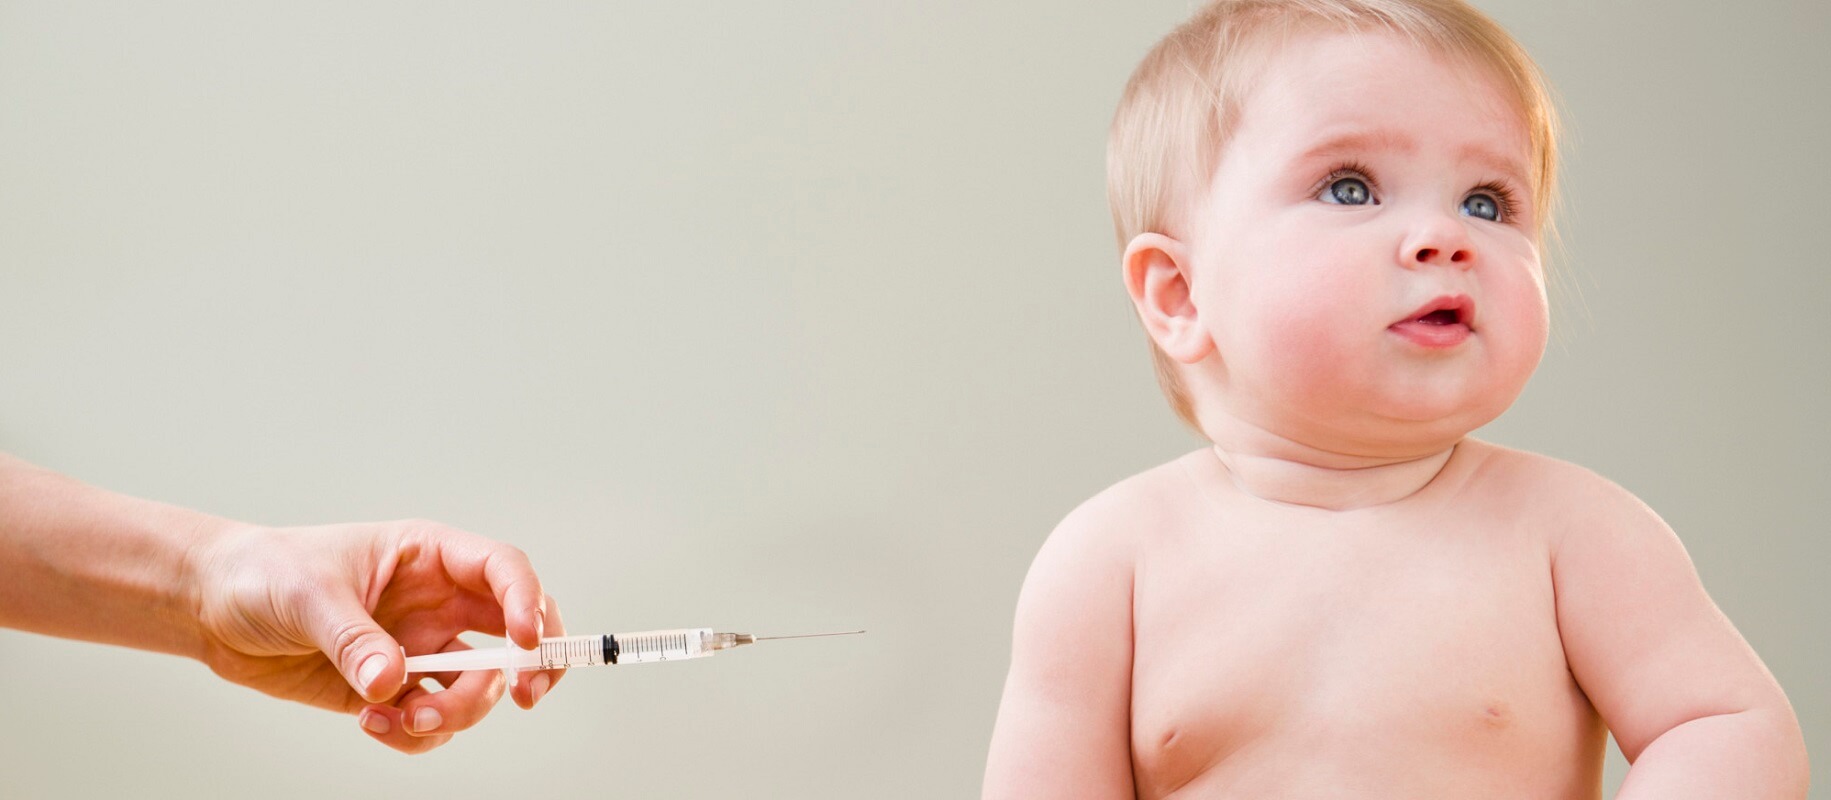 Parents Allowed to Vaccinate Children in Cars Because of Coronavirus - Coming Soon in UAE